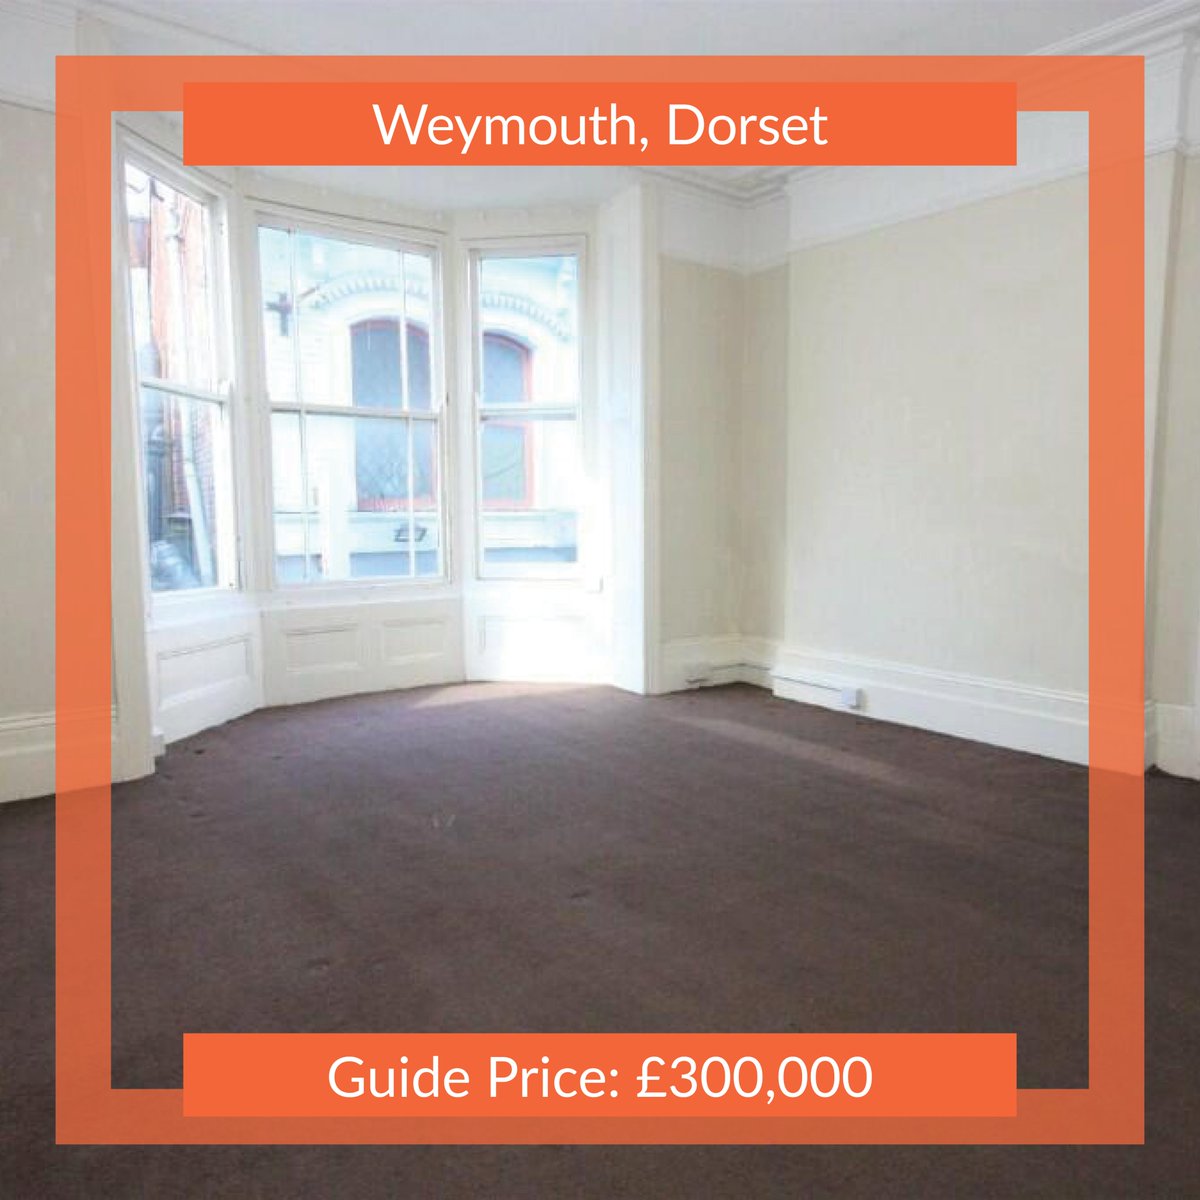 ⭐️ New Listing
💳 Mixed-Use Investment in #Weymouth #Dorset
💷 Guide Price: £300,000
🗓 Auction Date: 04/07/24
📞 0800 038 5996
📧 info@whoobid.co.uk
🌐 Website: whoobid.co.uk/accueil/auctio…

#Whoobid #PropertyAuction #NewListing #PropertyInvestment #PropertyListing #UKProperty